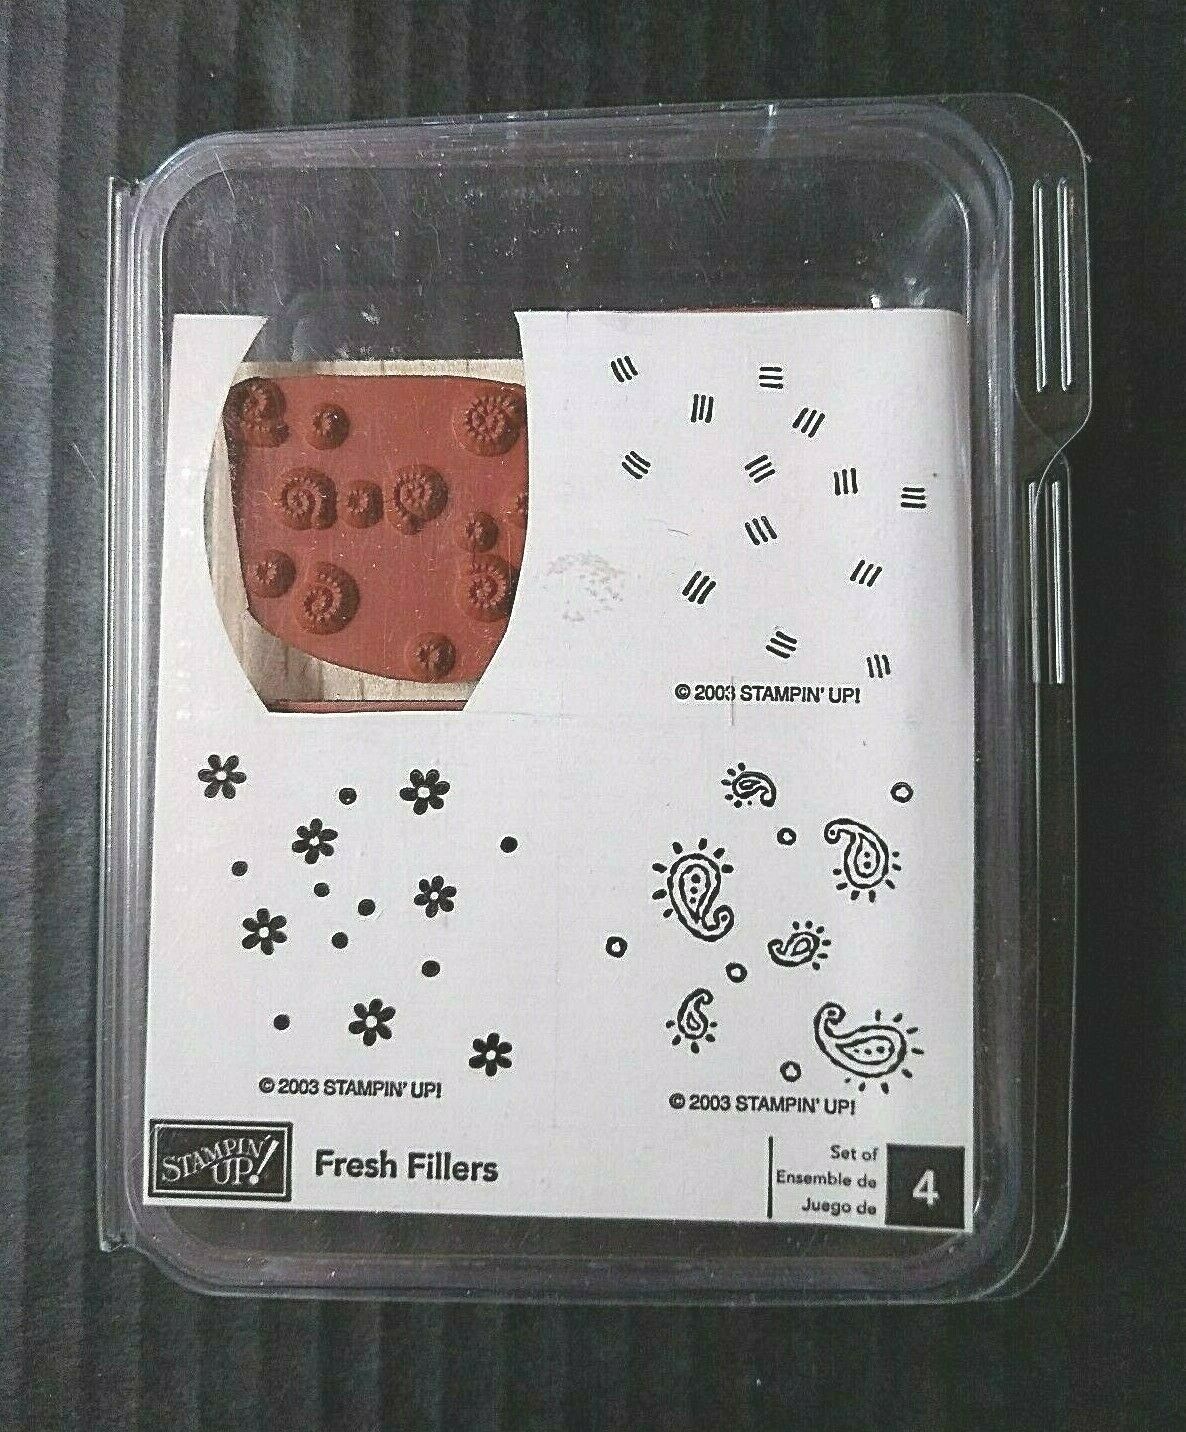 Stampin Up Rubber Stamps Fresh Fillers Confetti Paisley Flowers Floral 2003 Set